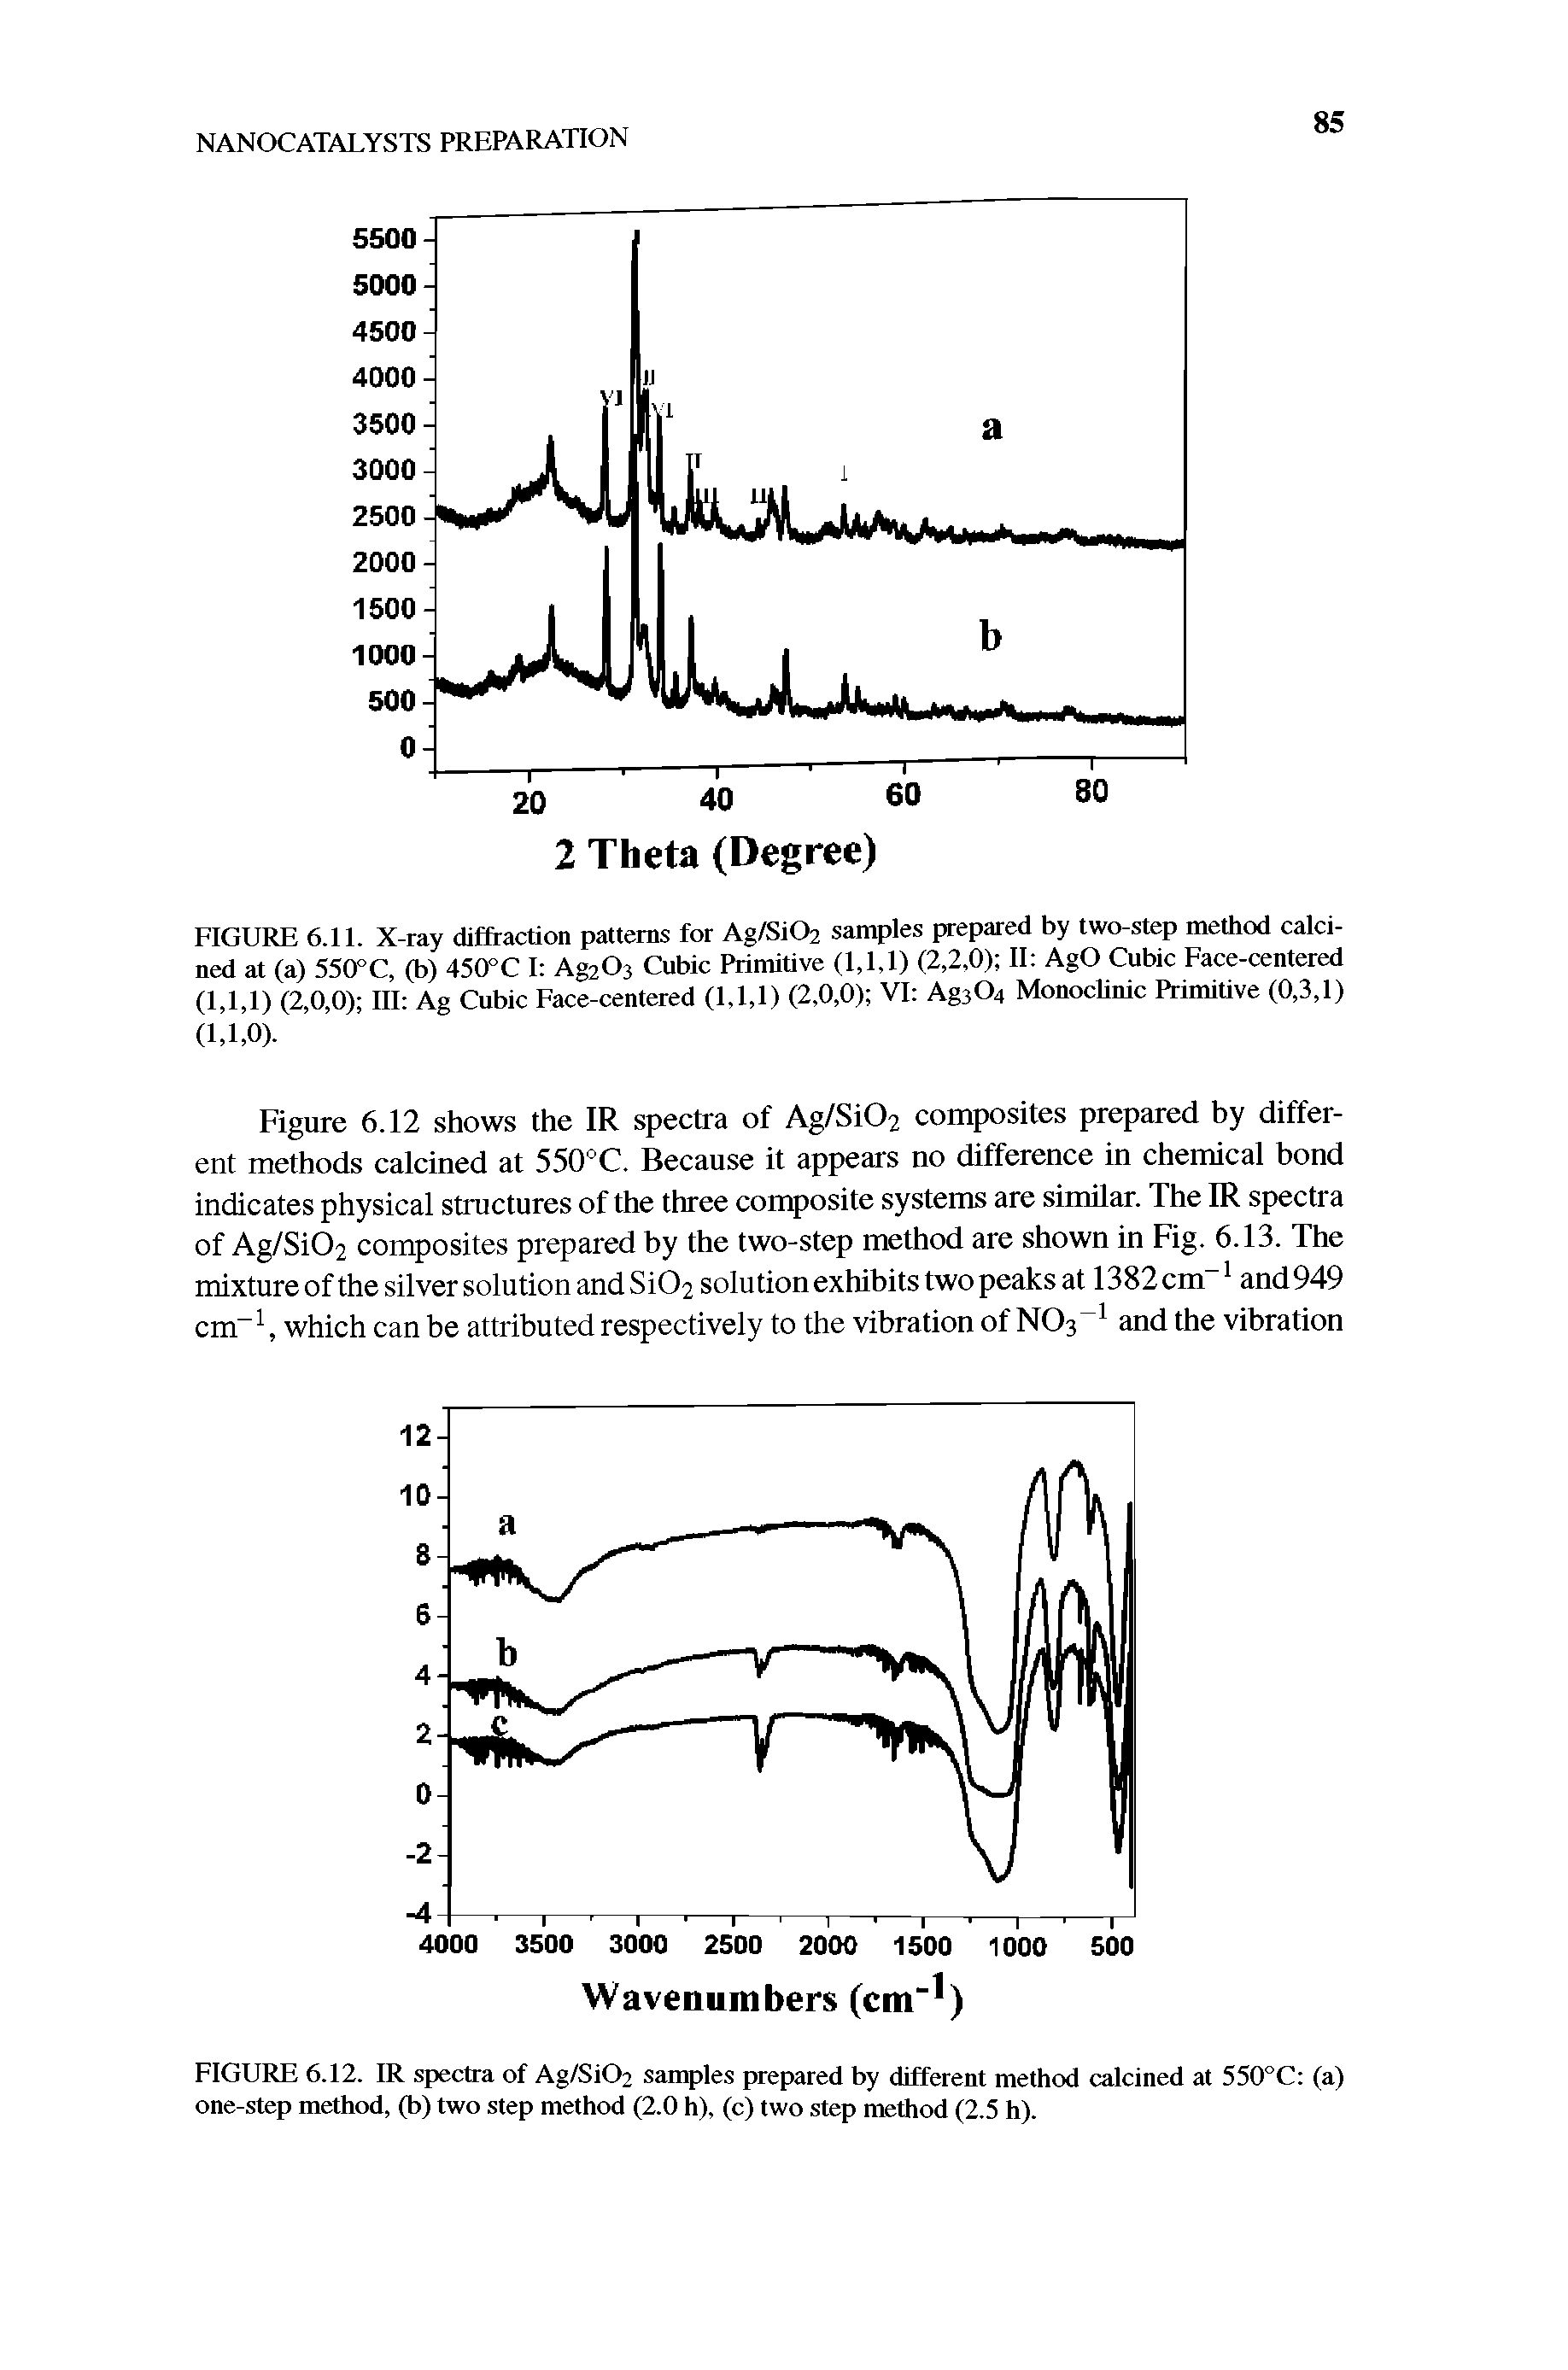 Figure 6.12 shows the IR spectra of Ag/Si02 composites prepared by different methods calcined at 550°C. Because it appears no difference in chemical bond indicates physical structures of the three composite systems are similar. The IR spectra of Ag/Si02 composites prepared by the two-step method are shown in Fig. 6.13. The mixture ofthe silver solution and Si02 solution exhibits two peaks at 1382cm and 949 cm which can be attributed respectively to the vibration of and the vibration...